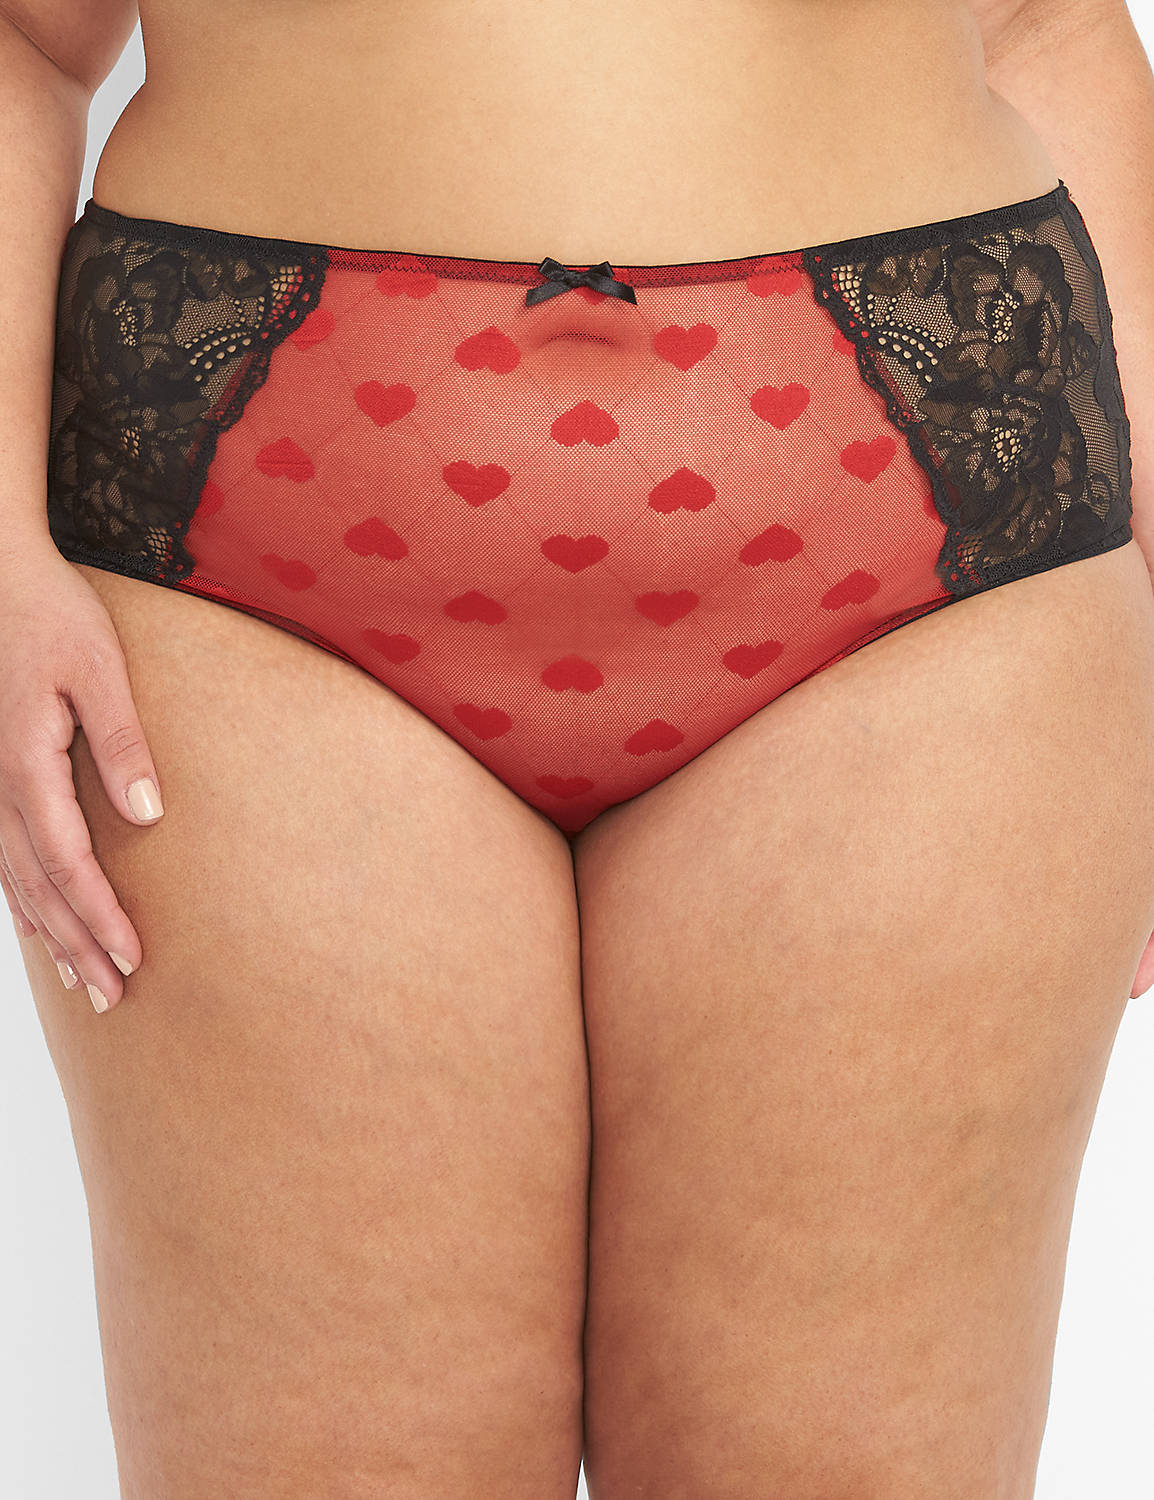 Lane Bryant 14/16 18/20 Cacique Strappy Back Cheeky Panty Mesh Lace Red